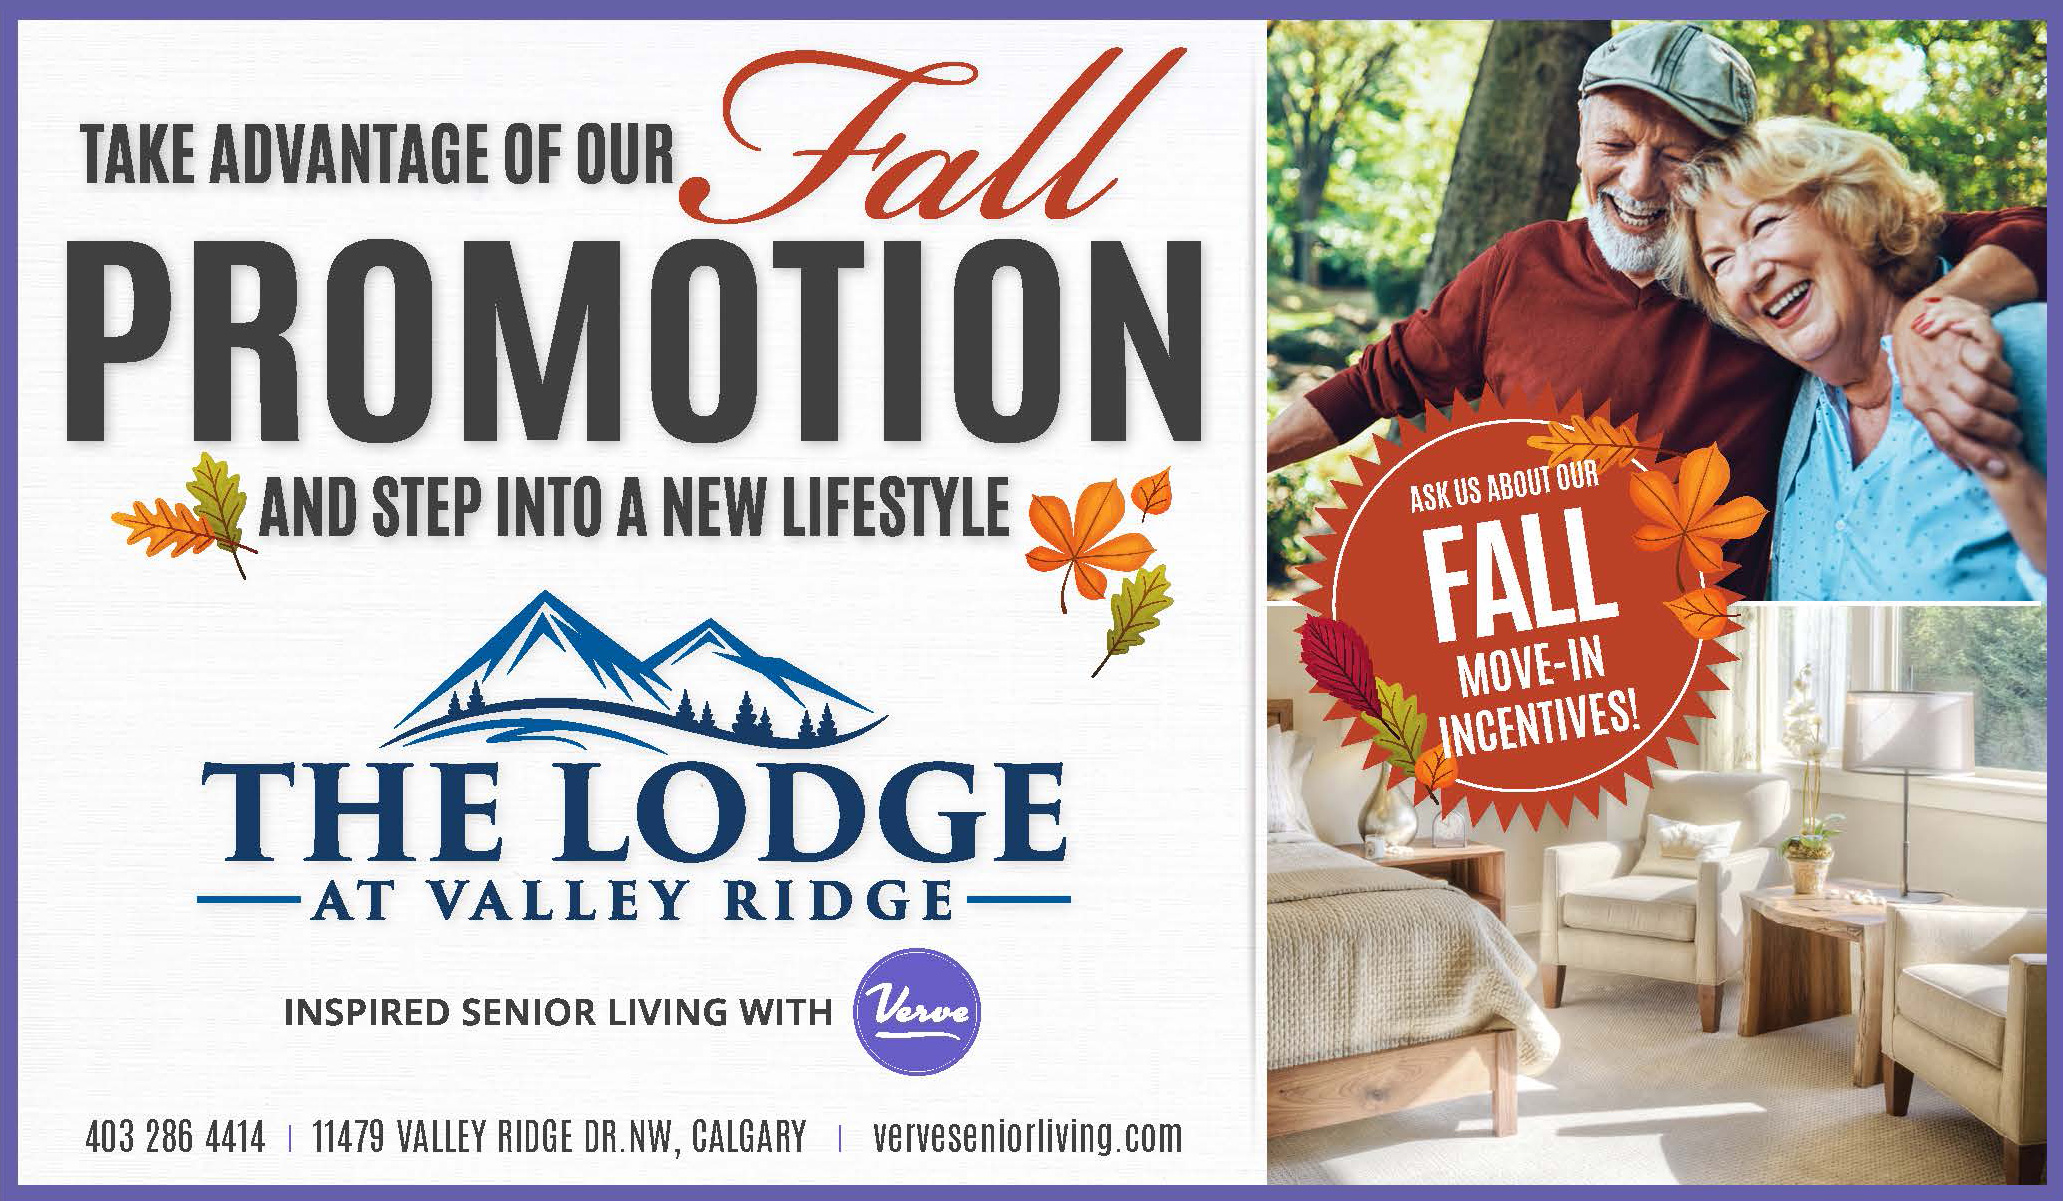 The Lodge at Valley Ridge August 2019